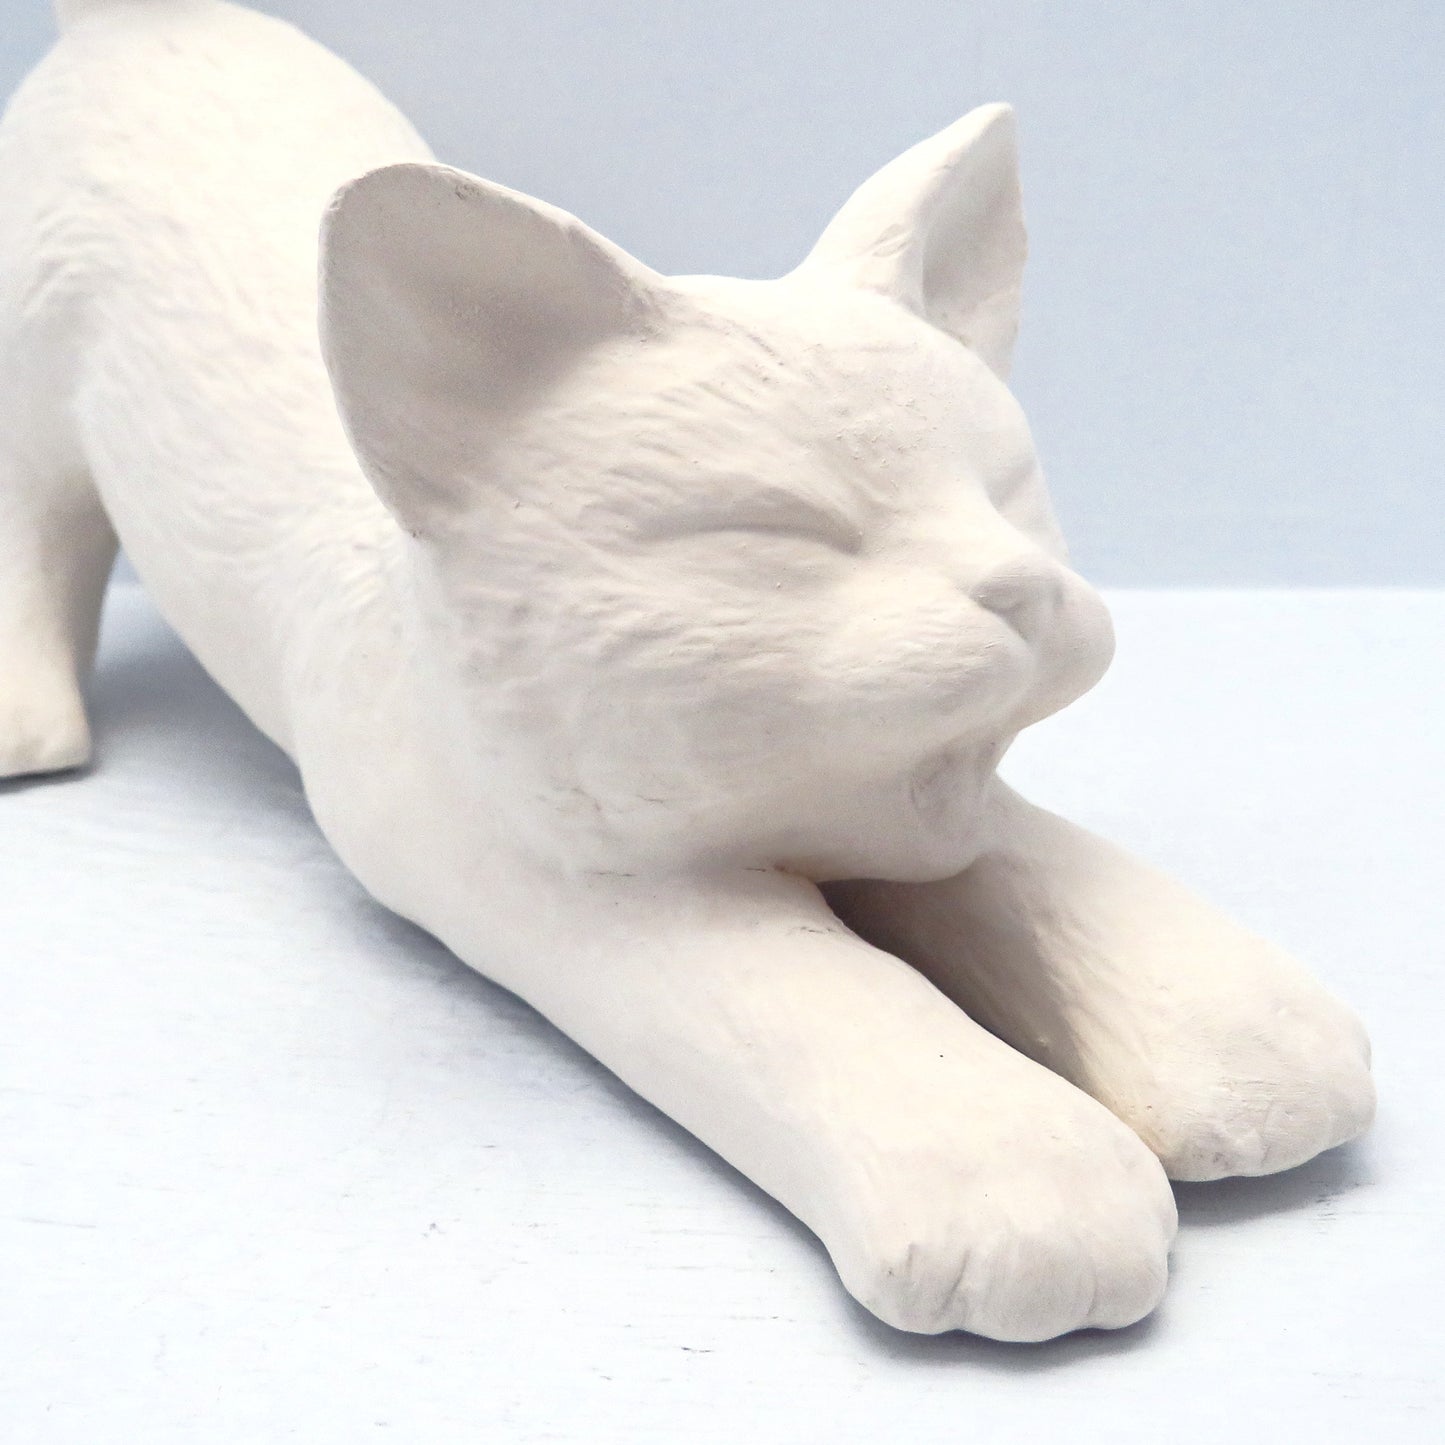 Close up veiw of handmade paintable stretching cat's face.  Its mouth is open and its eyes are closed.